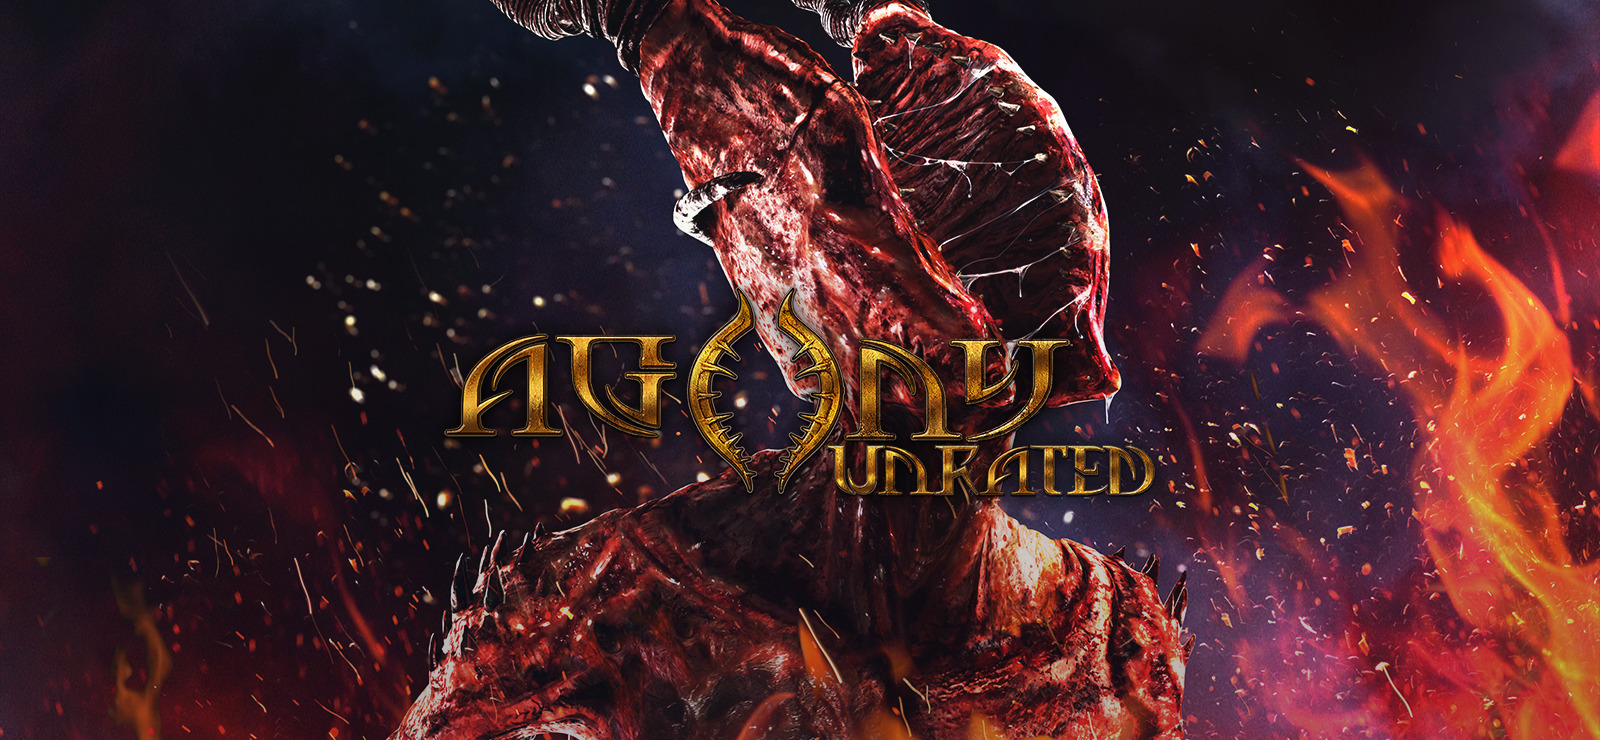 Agony unrated mod